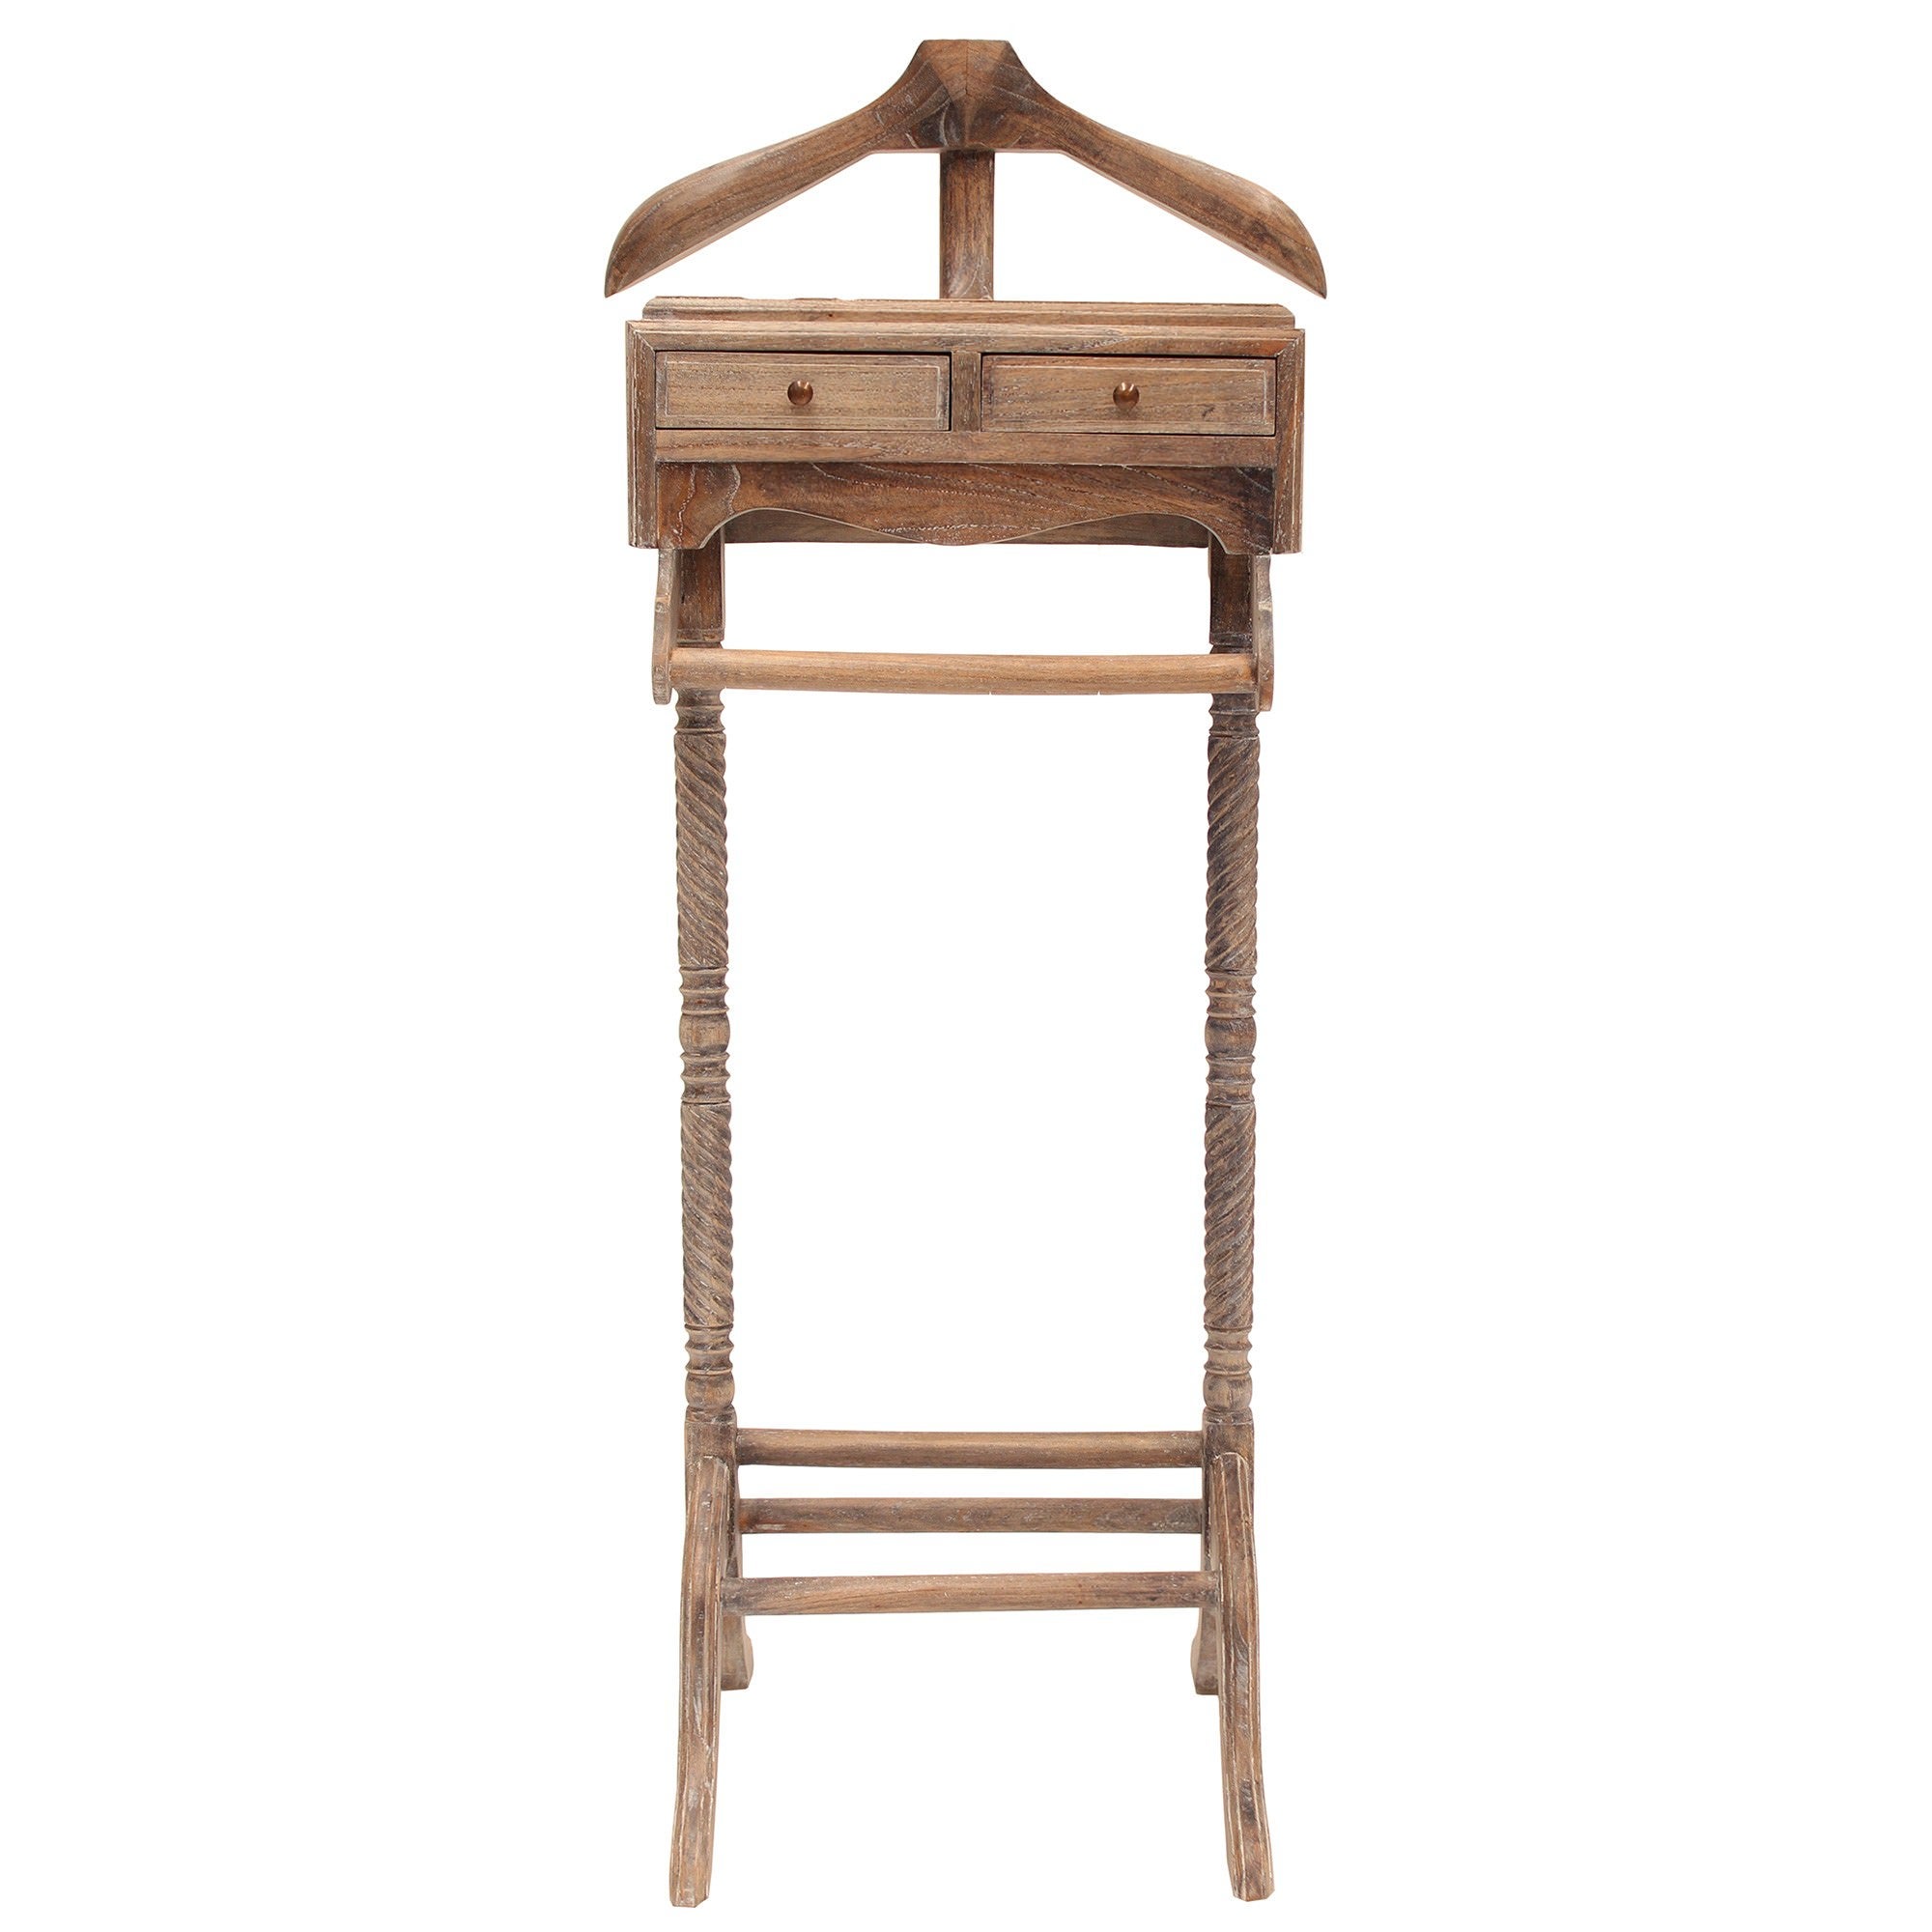 Recco Hand Crafted Mahogany Valet Stand, Weathered Oak